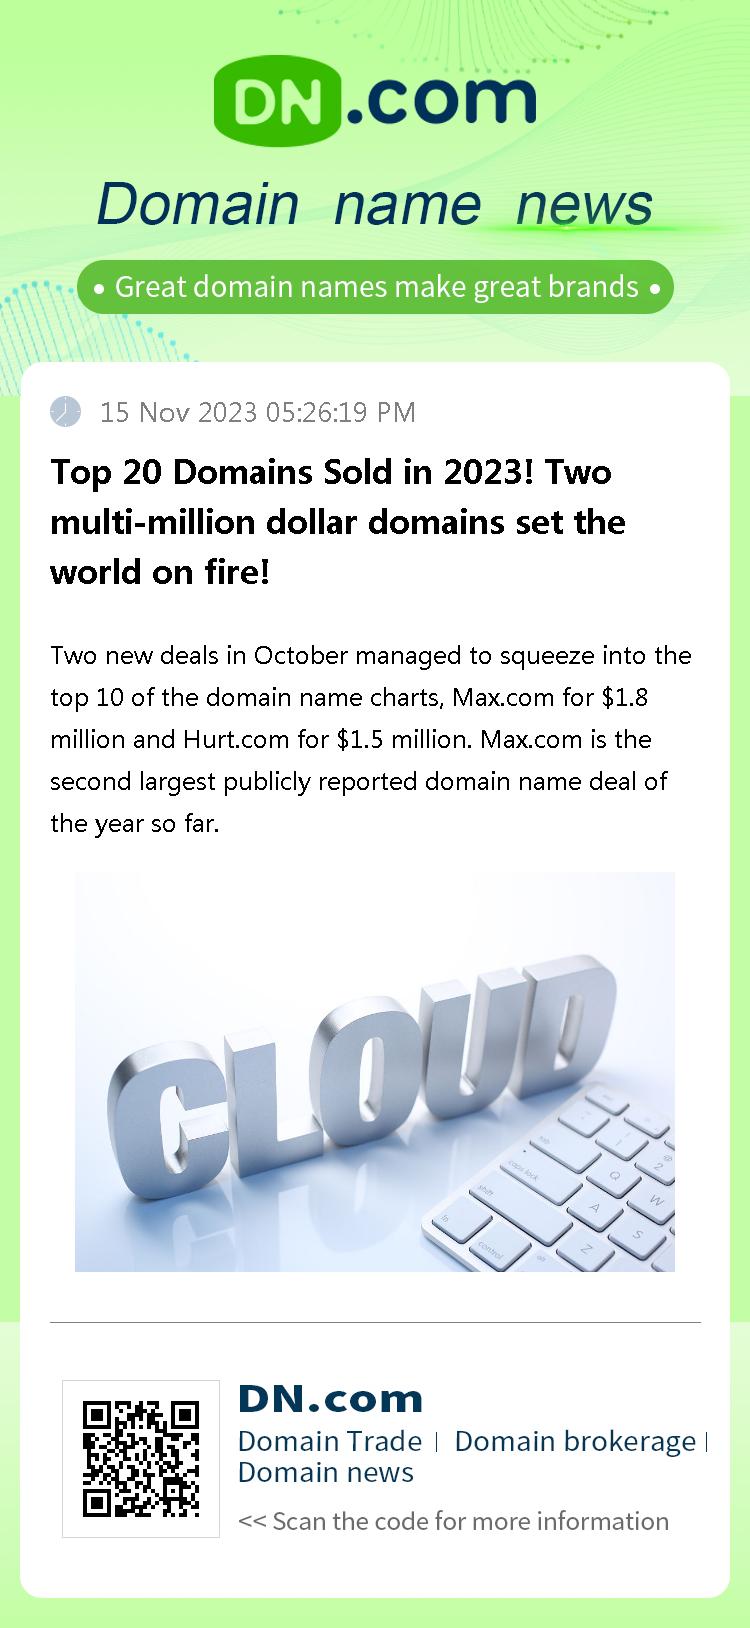 Top 20 Domains Sold in 2023! Two multi-million dollar domains set the world on fire!